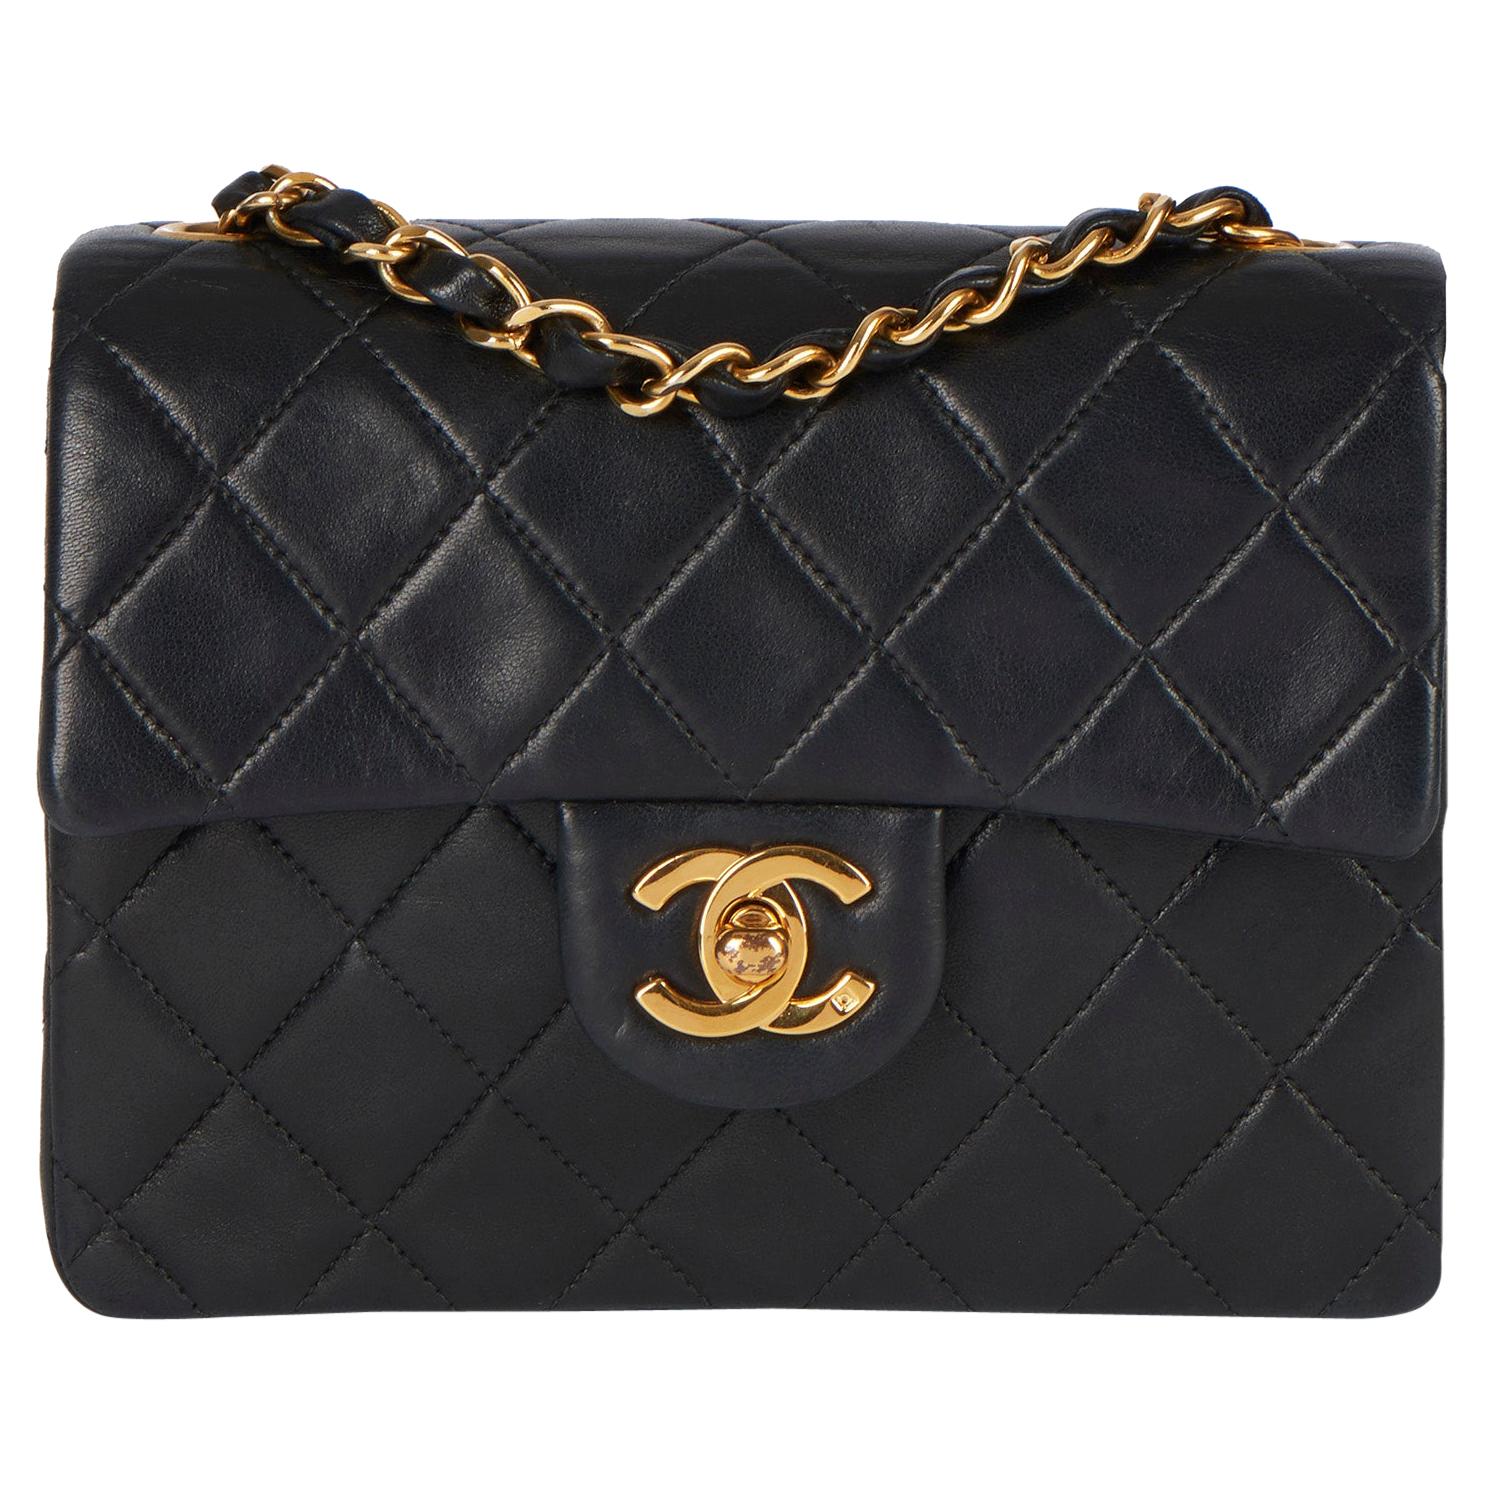 Chanel 1997 Black Quilted Lambskin Leather Vintage Mini Flap Bag 